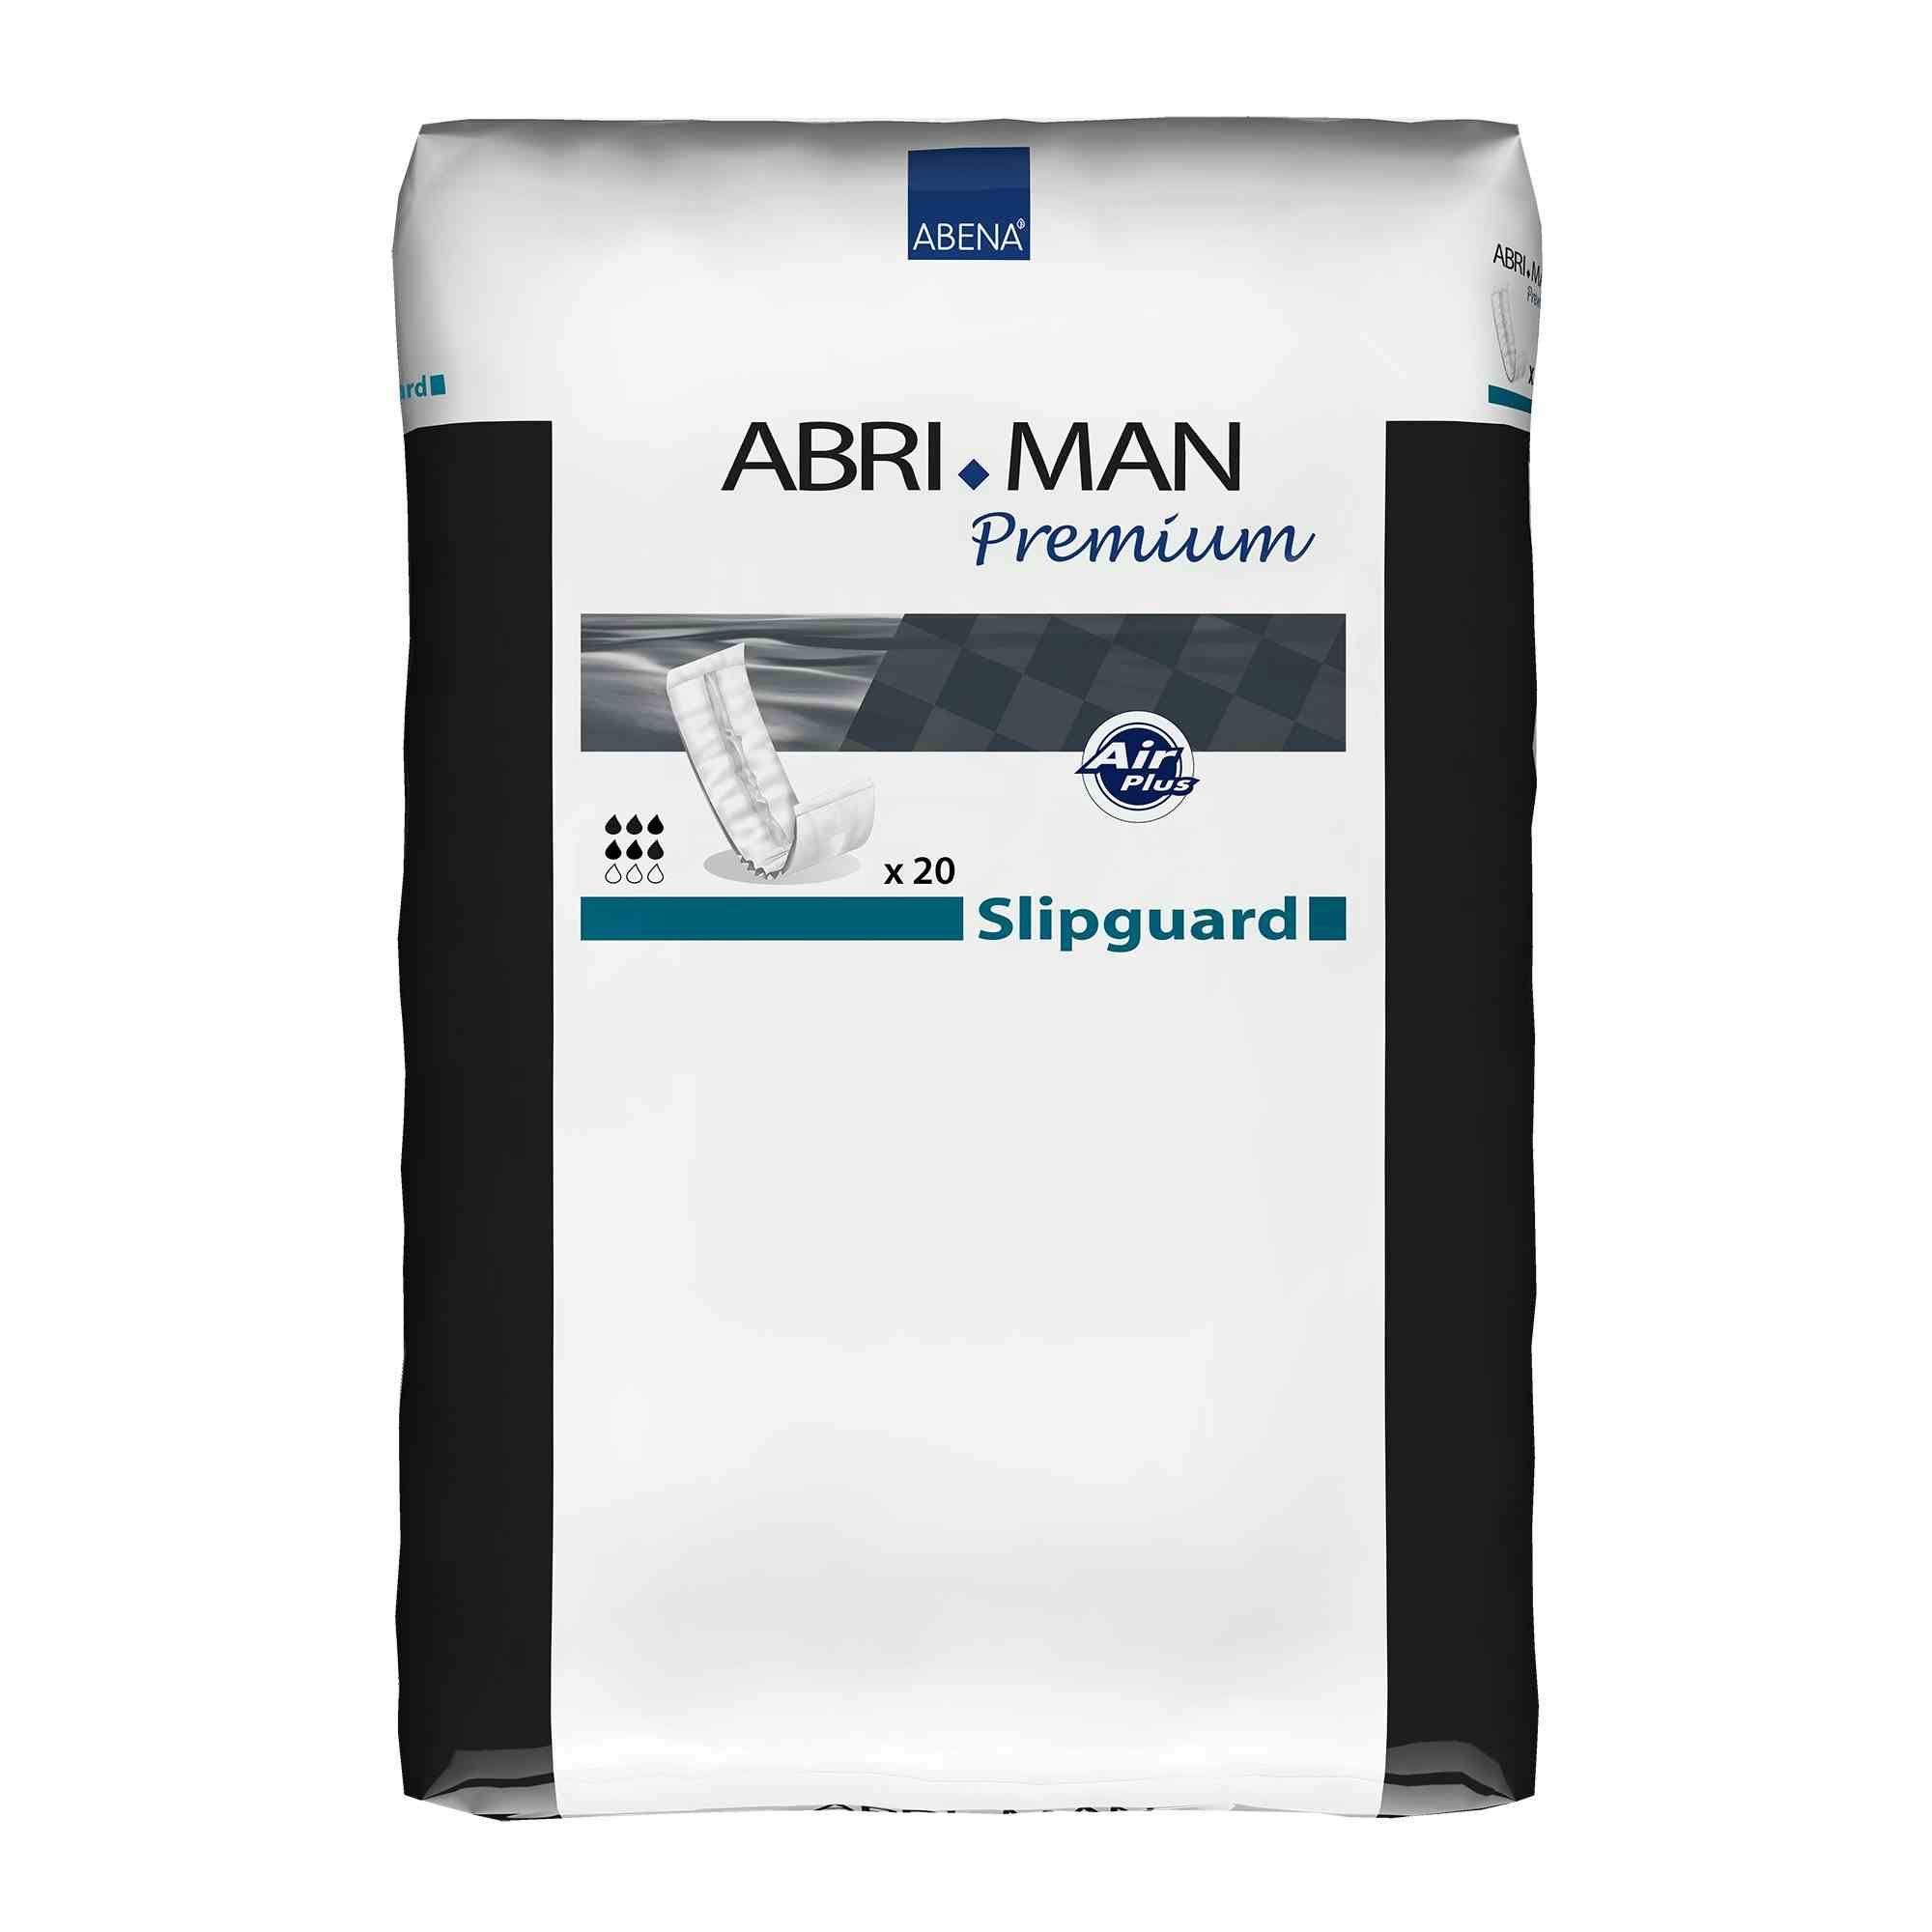 Abri-Man Slipguard Adult Male Disposable Bladder Control Pad, Moderate Absorbency, 207203, One Size Fits Most - Case of 100 (5 Bags)